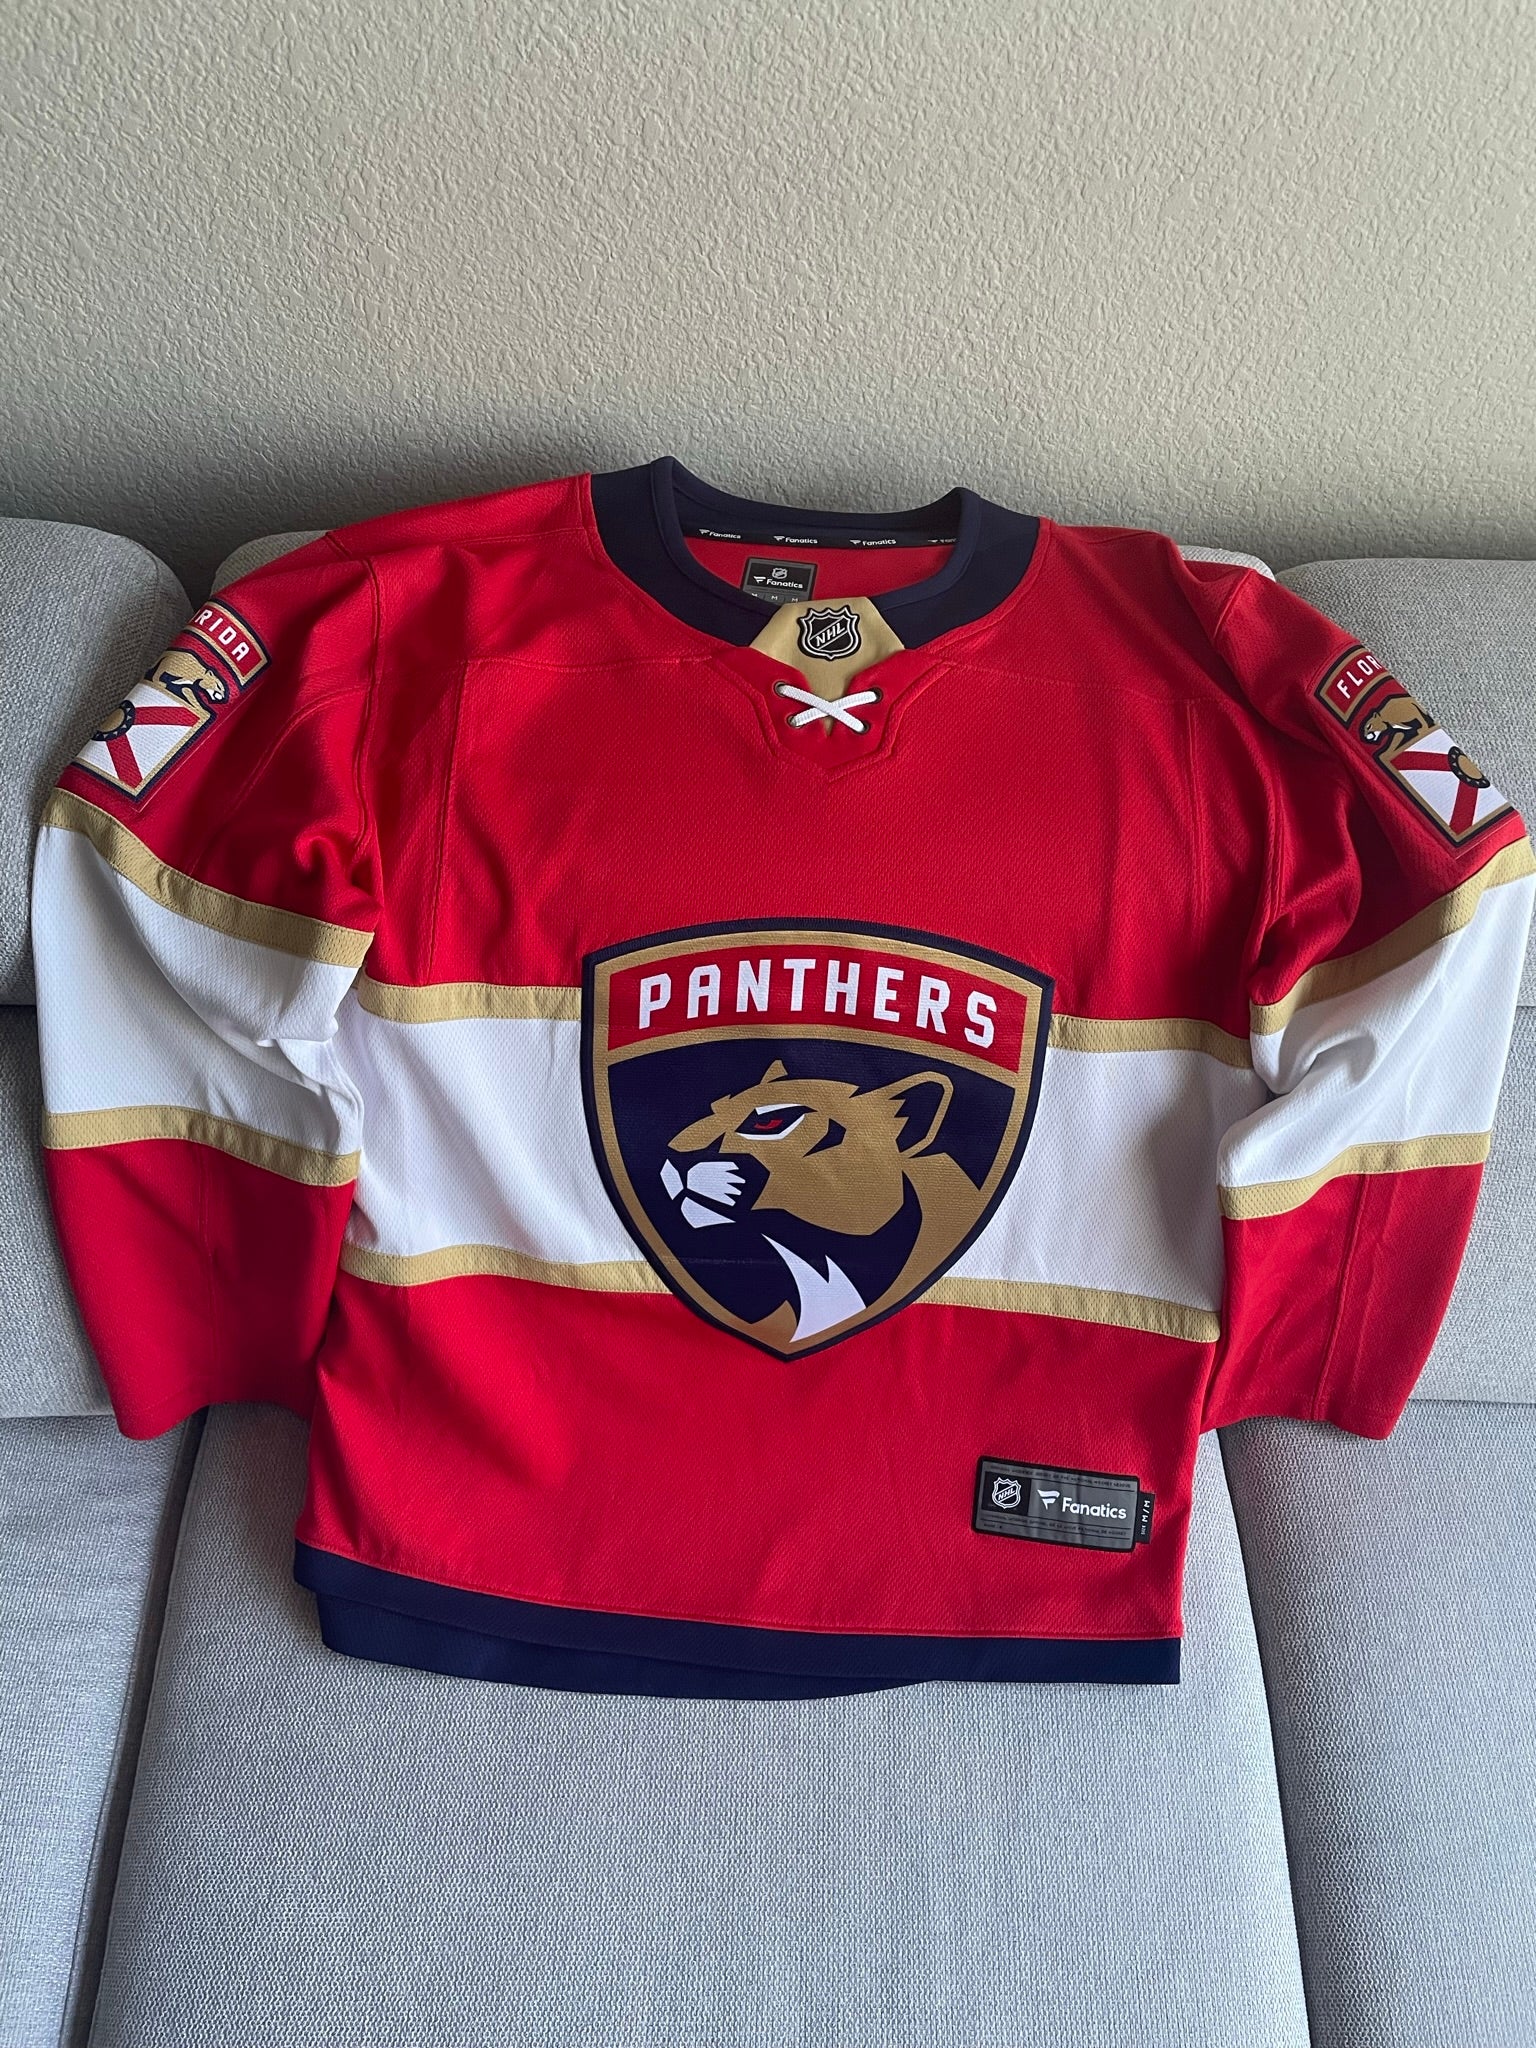 Panthers home jersey